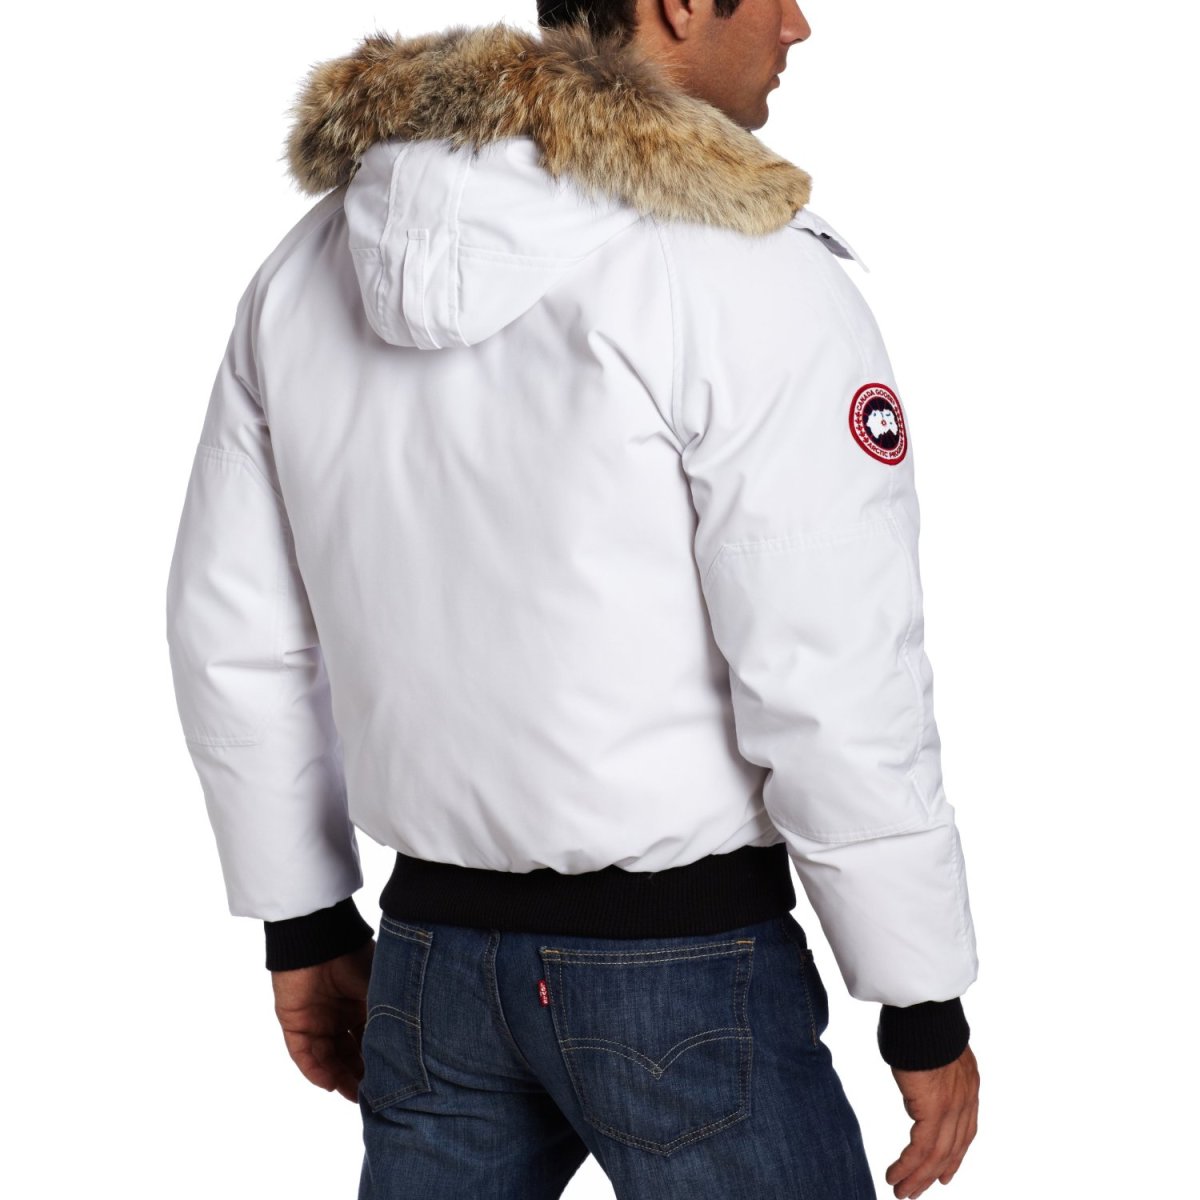 Canada Goose chateau parka online fake - A Complete Review Of The Chilliwack Bomber Jacket By Canada Goose